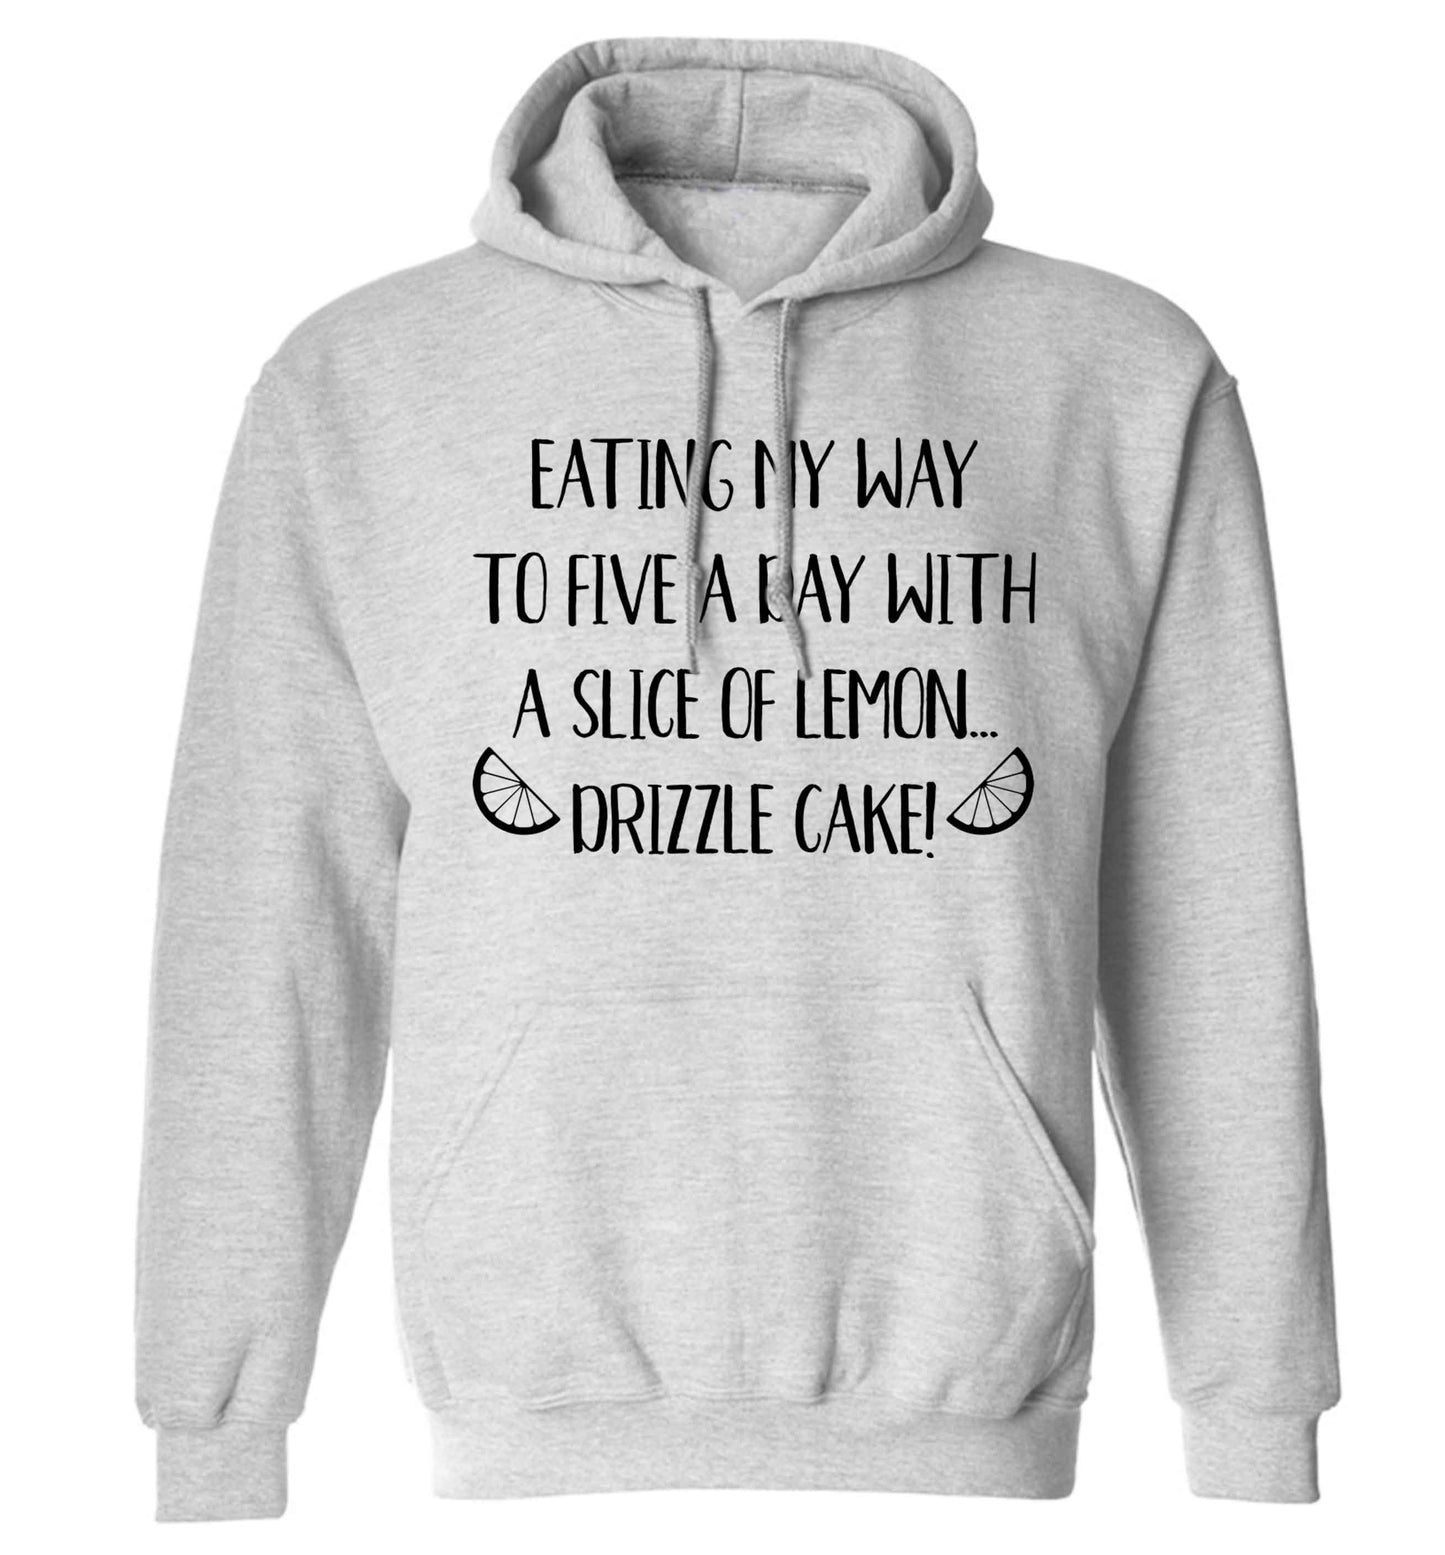 Eating my way to five a day with a slice of lemon drizzle cake day adults unisex grey hoodie 2XL